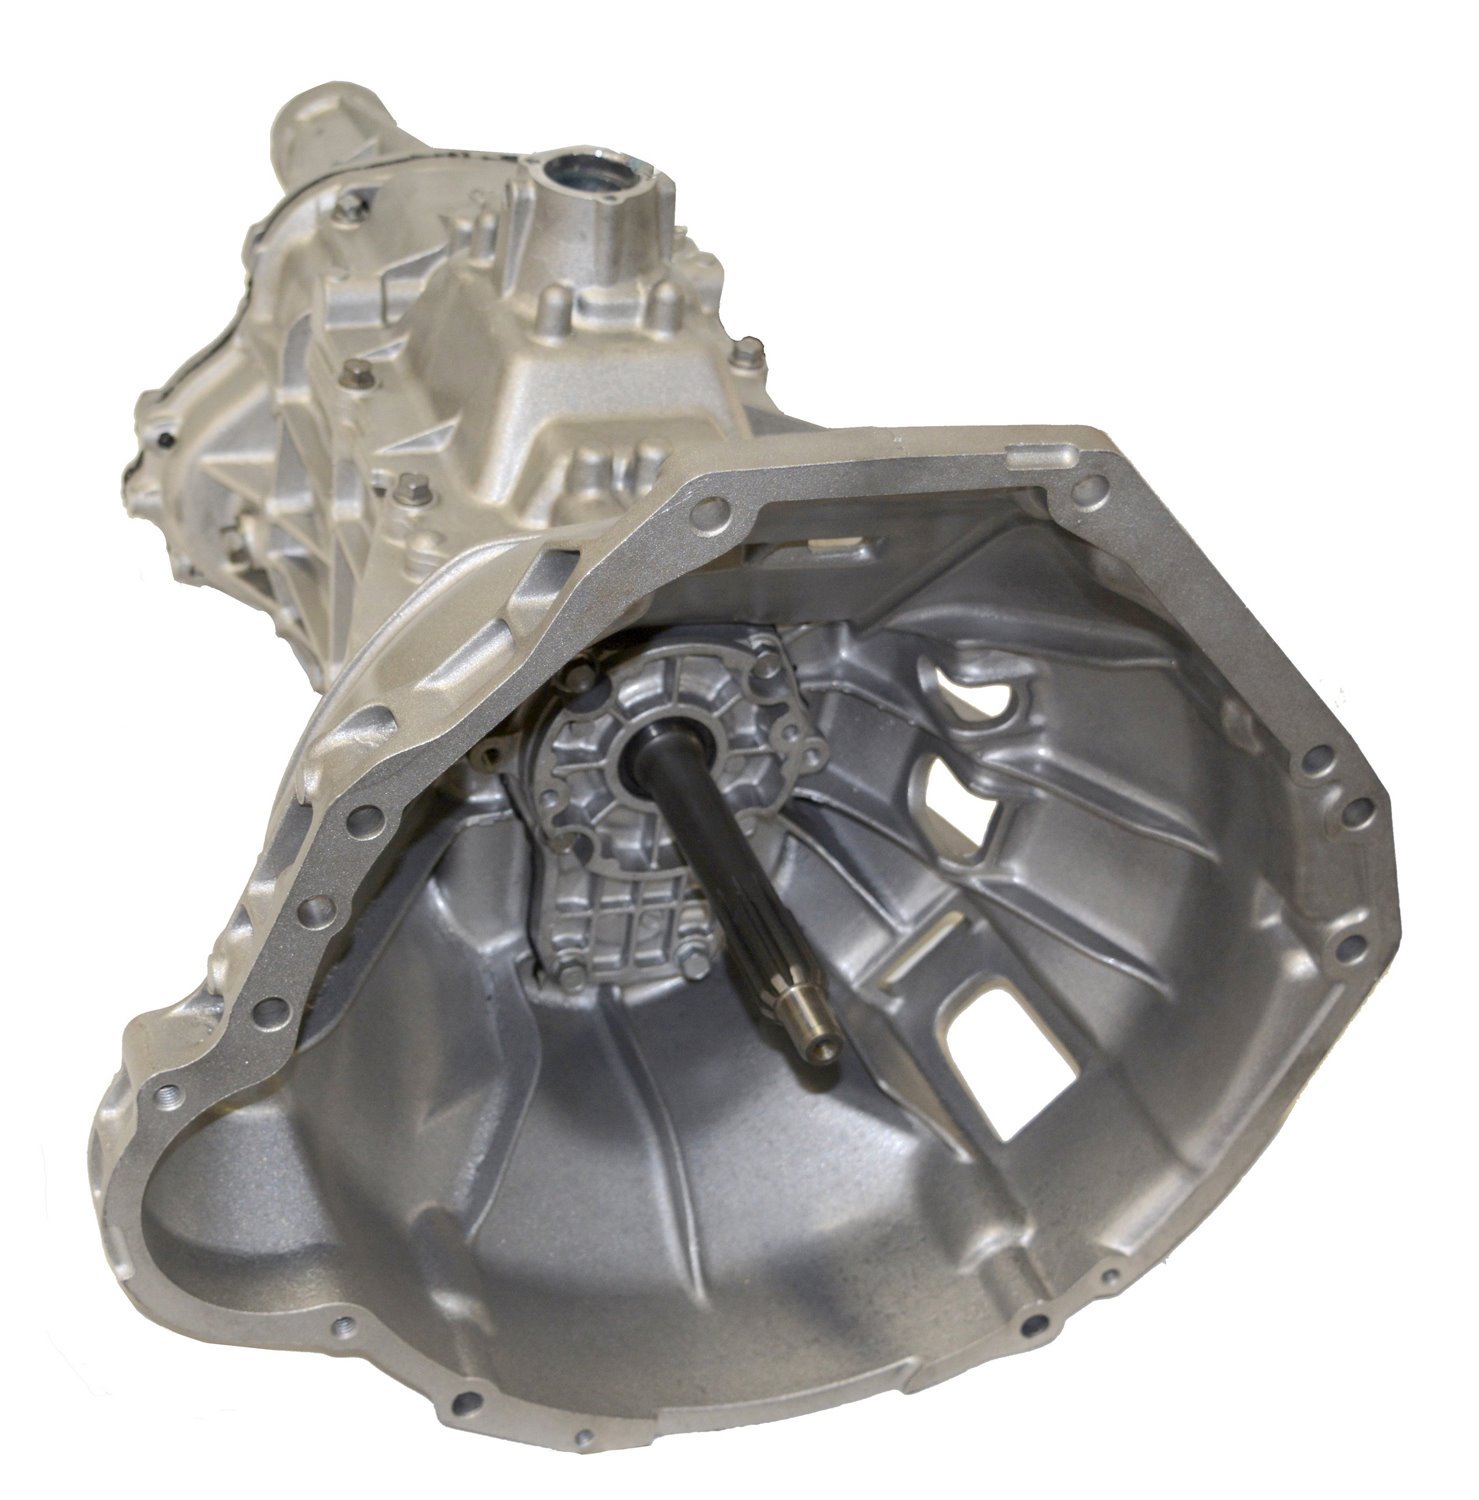 Remanufactured Manual Transmission for Ford 97-98 F150 &